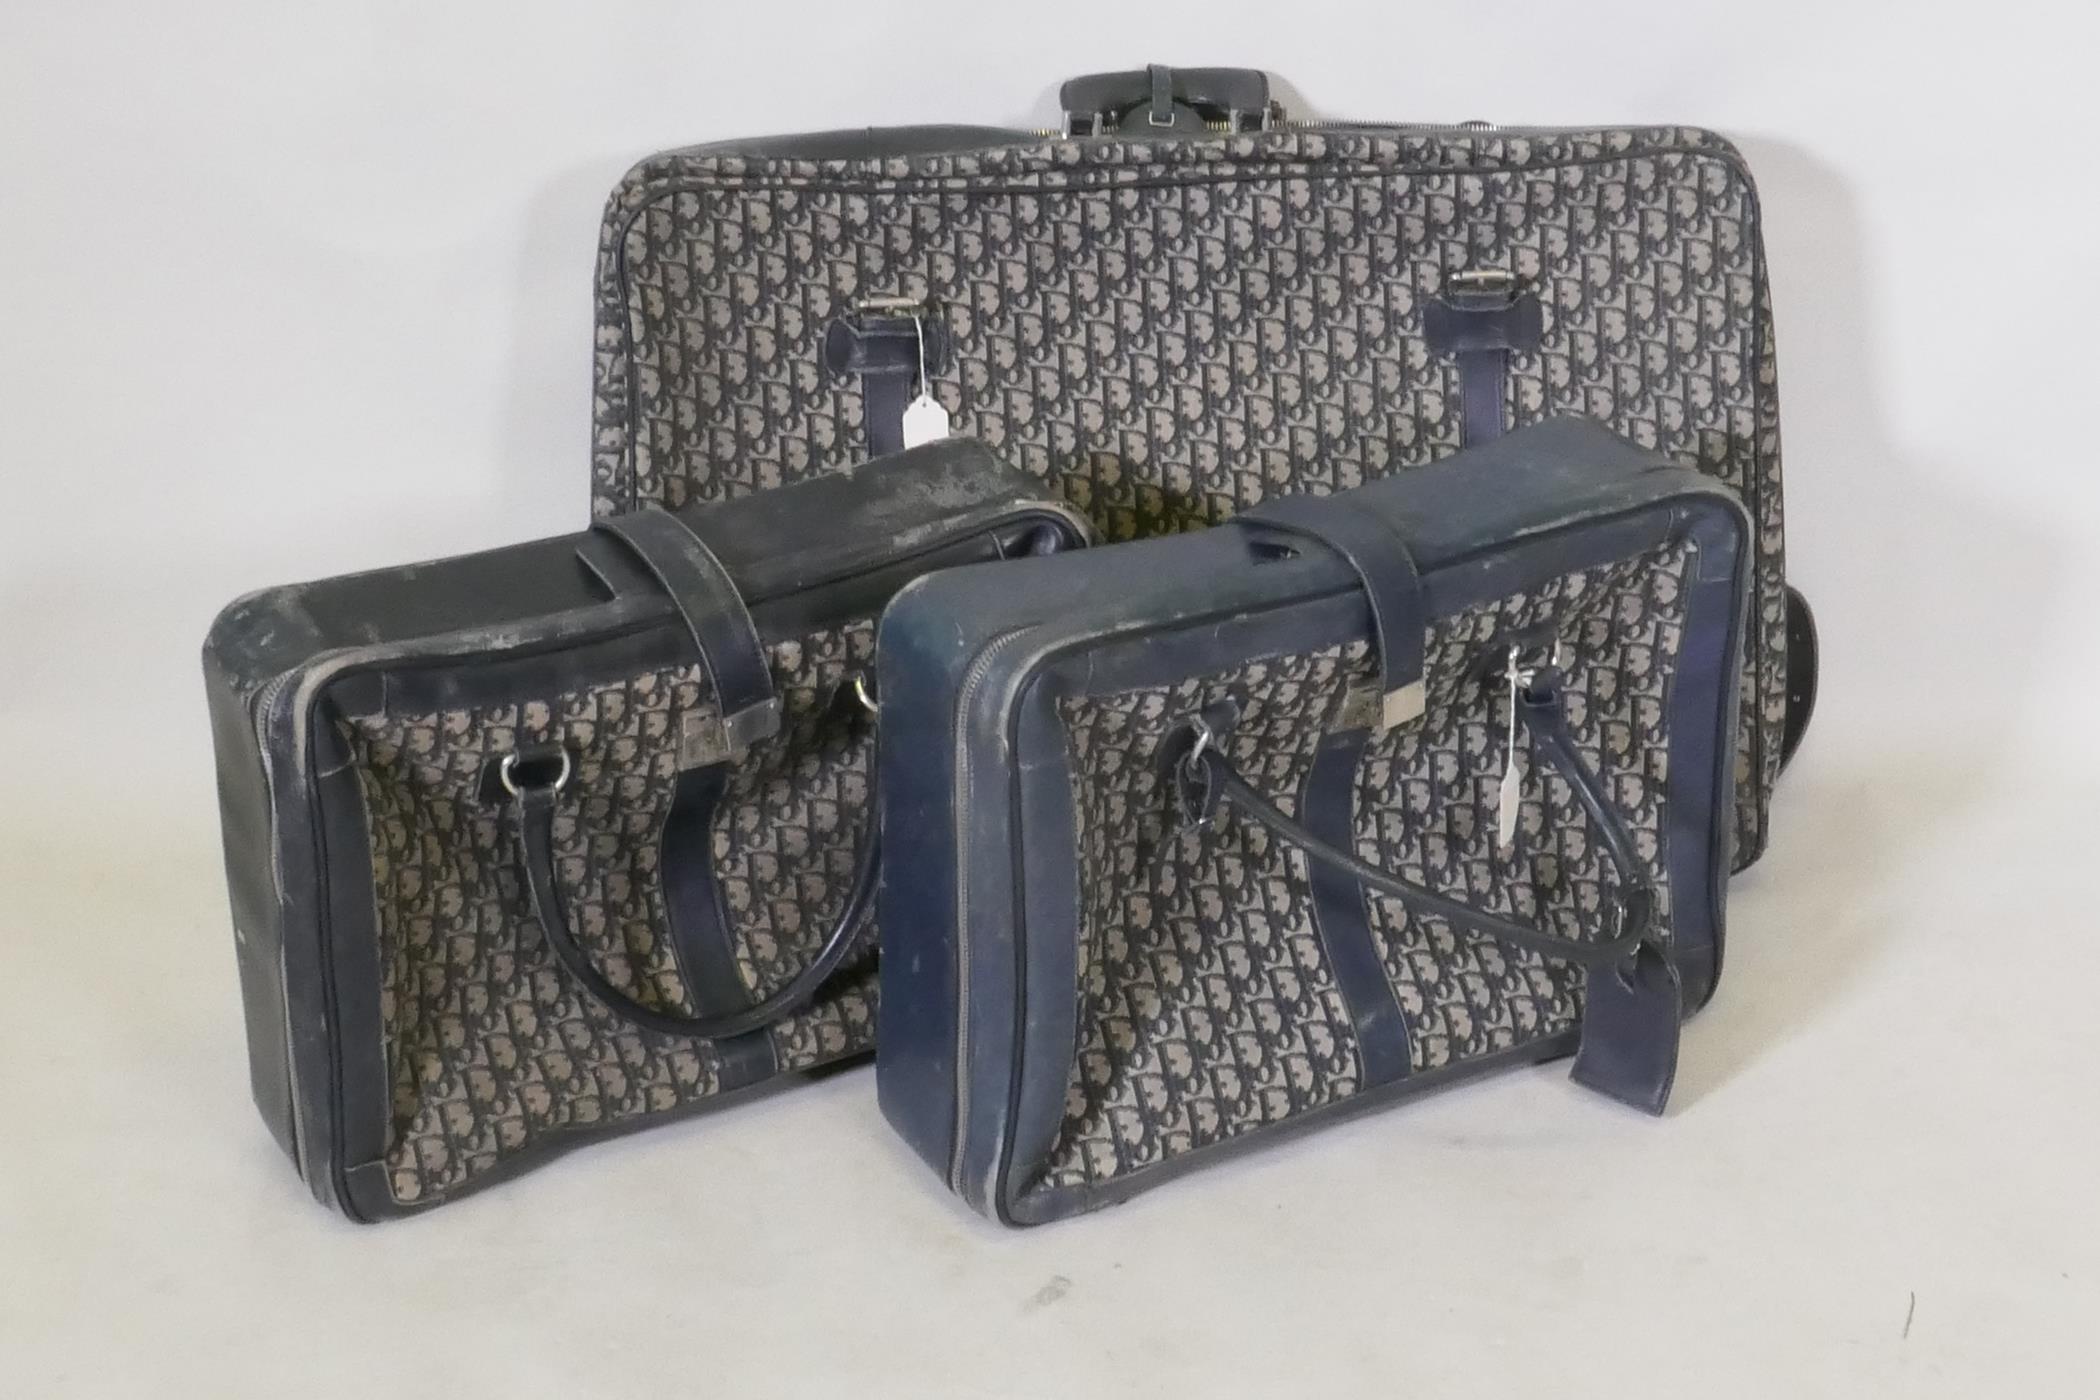 Christian Dior, three vintage fabric and blue leather suitcases, c.1970s, 75 x 50 x 15cm